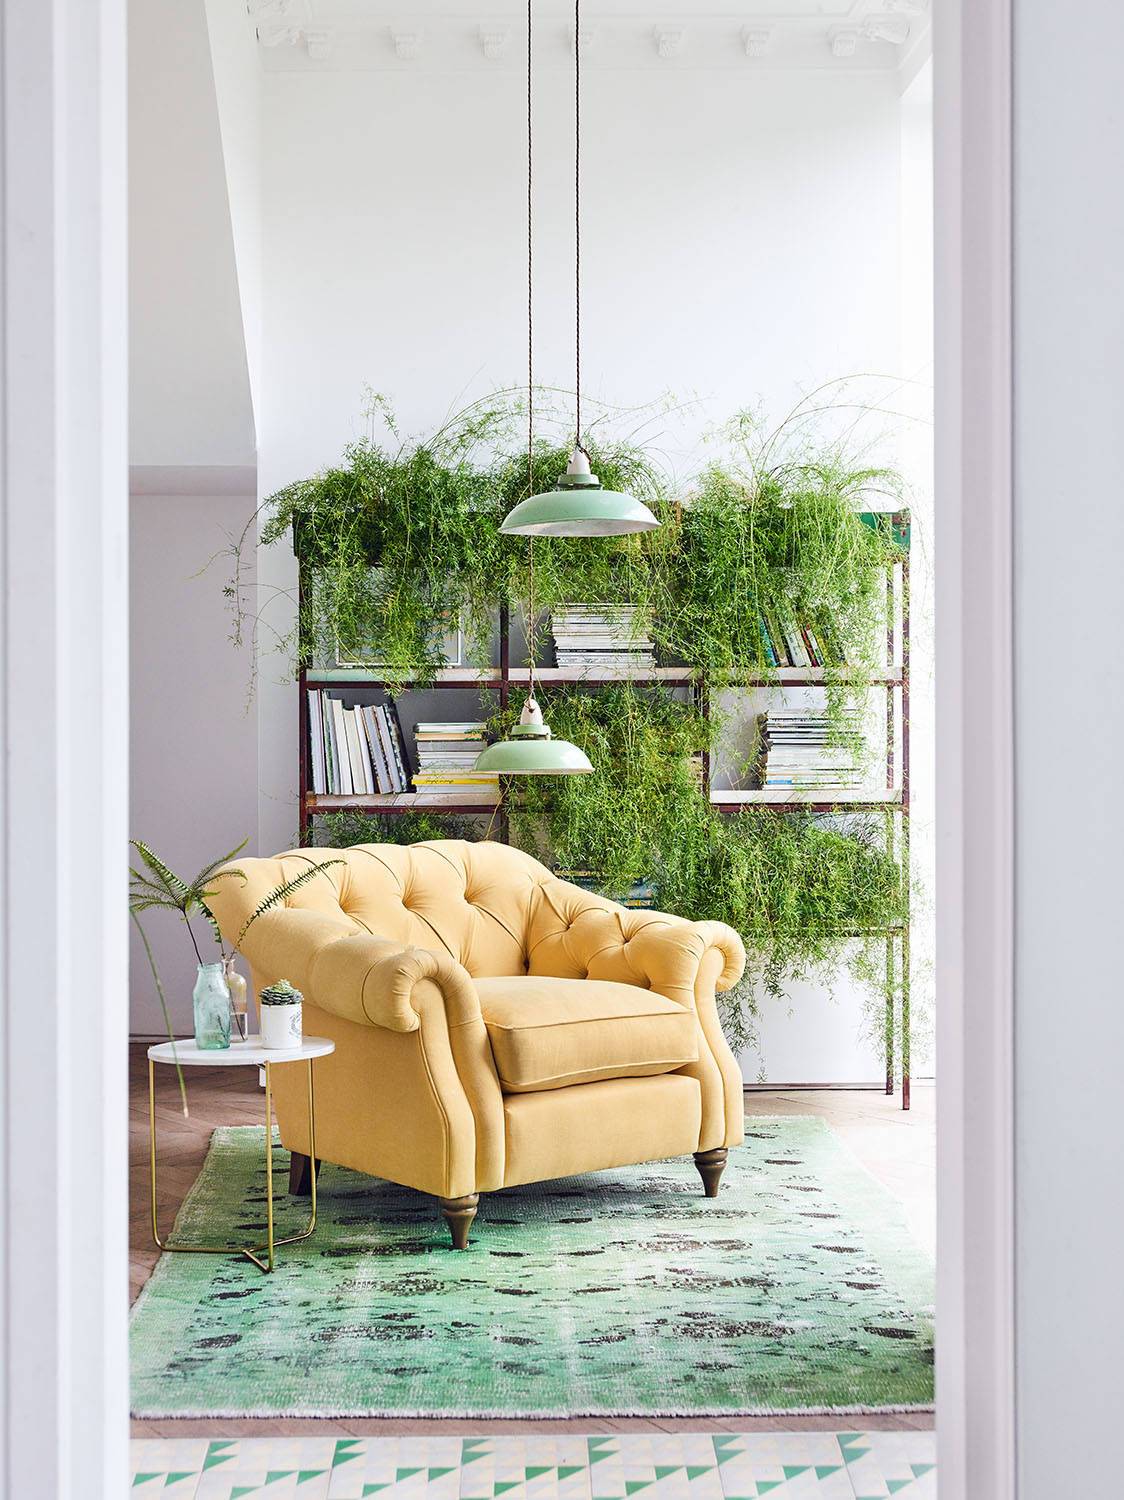 If your window is south facing and there are no obstructions, it can be considered direct light. (from Houzz)